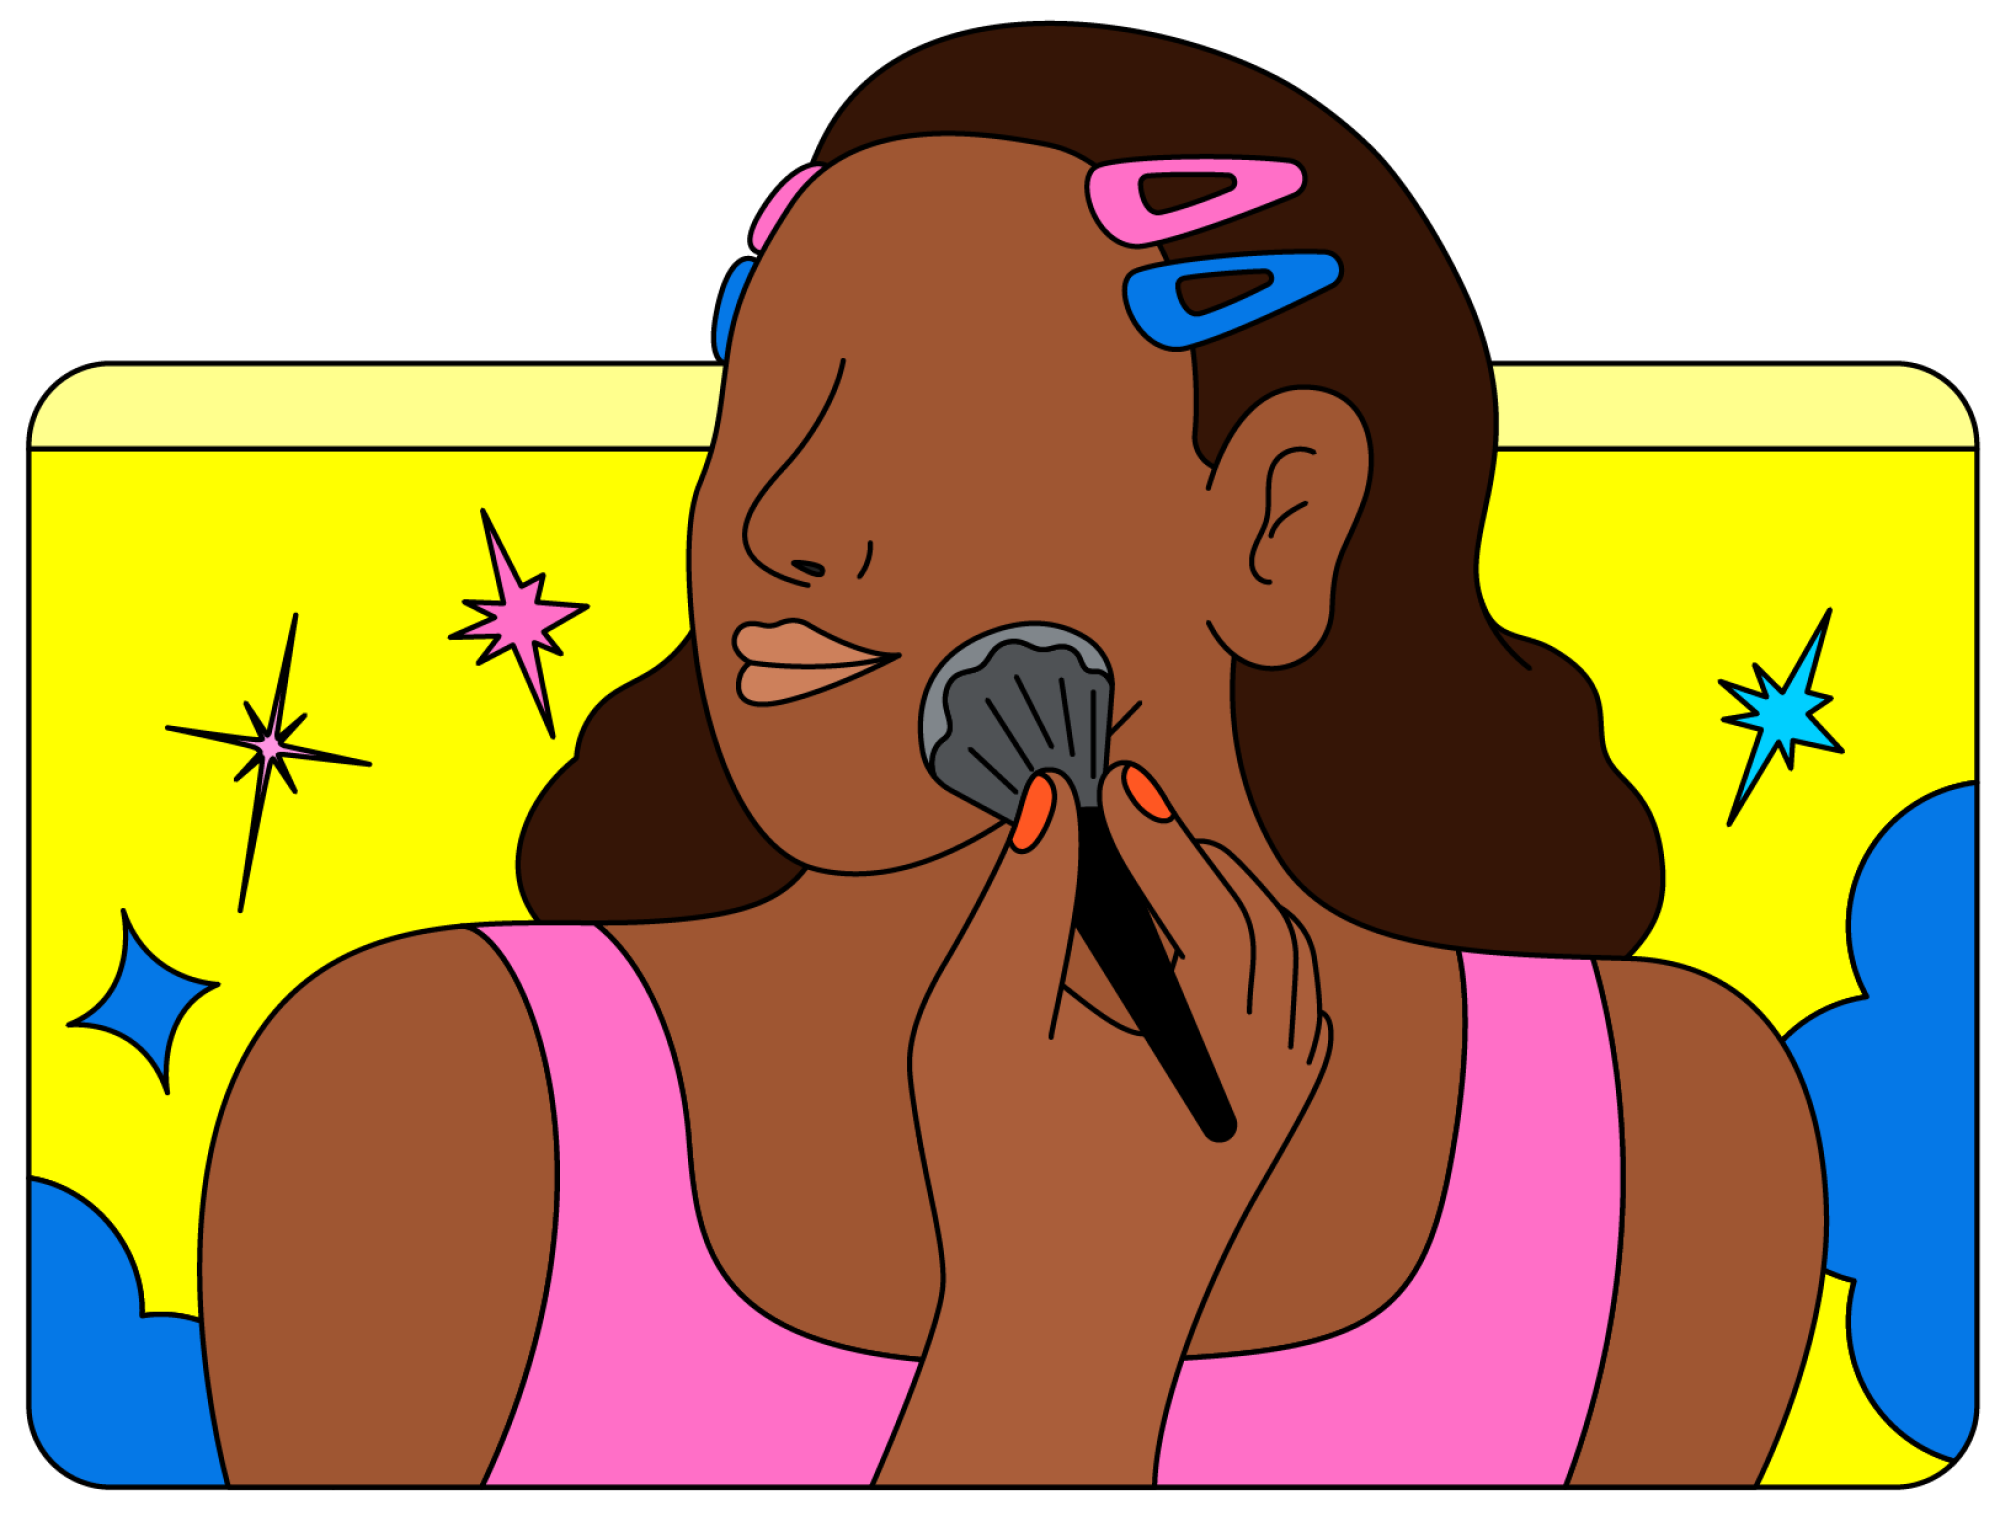 Illustration of a YouTuber doing a makeup tutorial